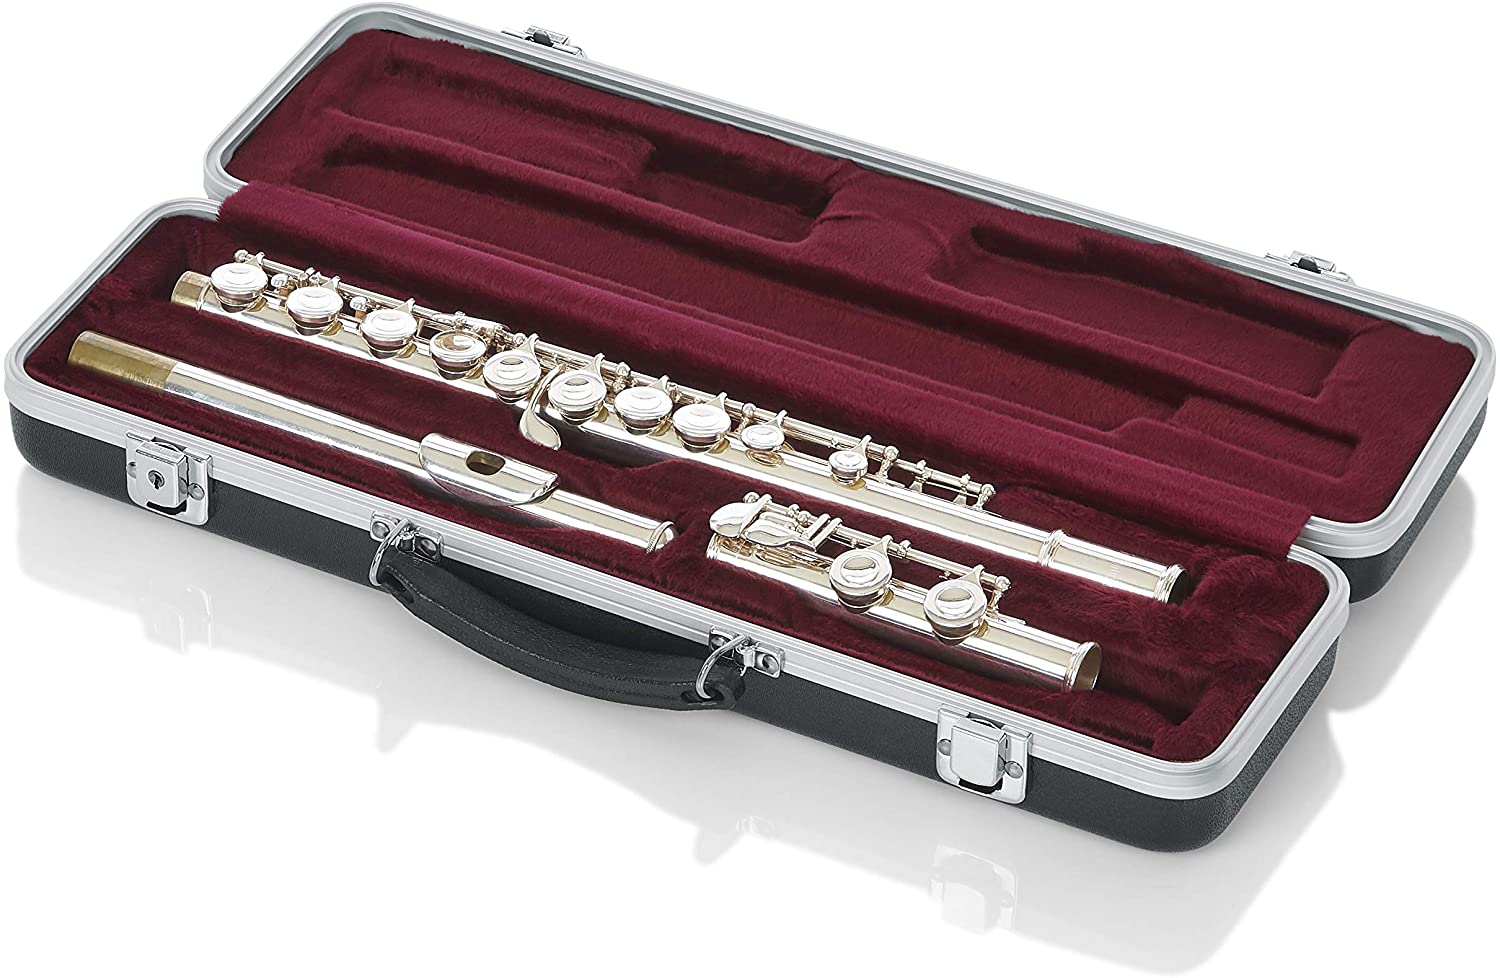  Gator Cases Lightweight Molded Flute Case with Locking Latch and Plush Lined Interior